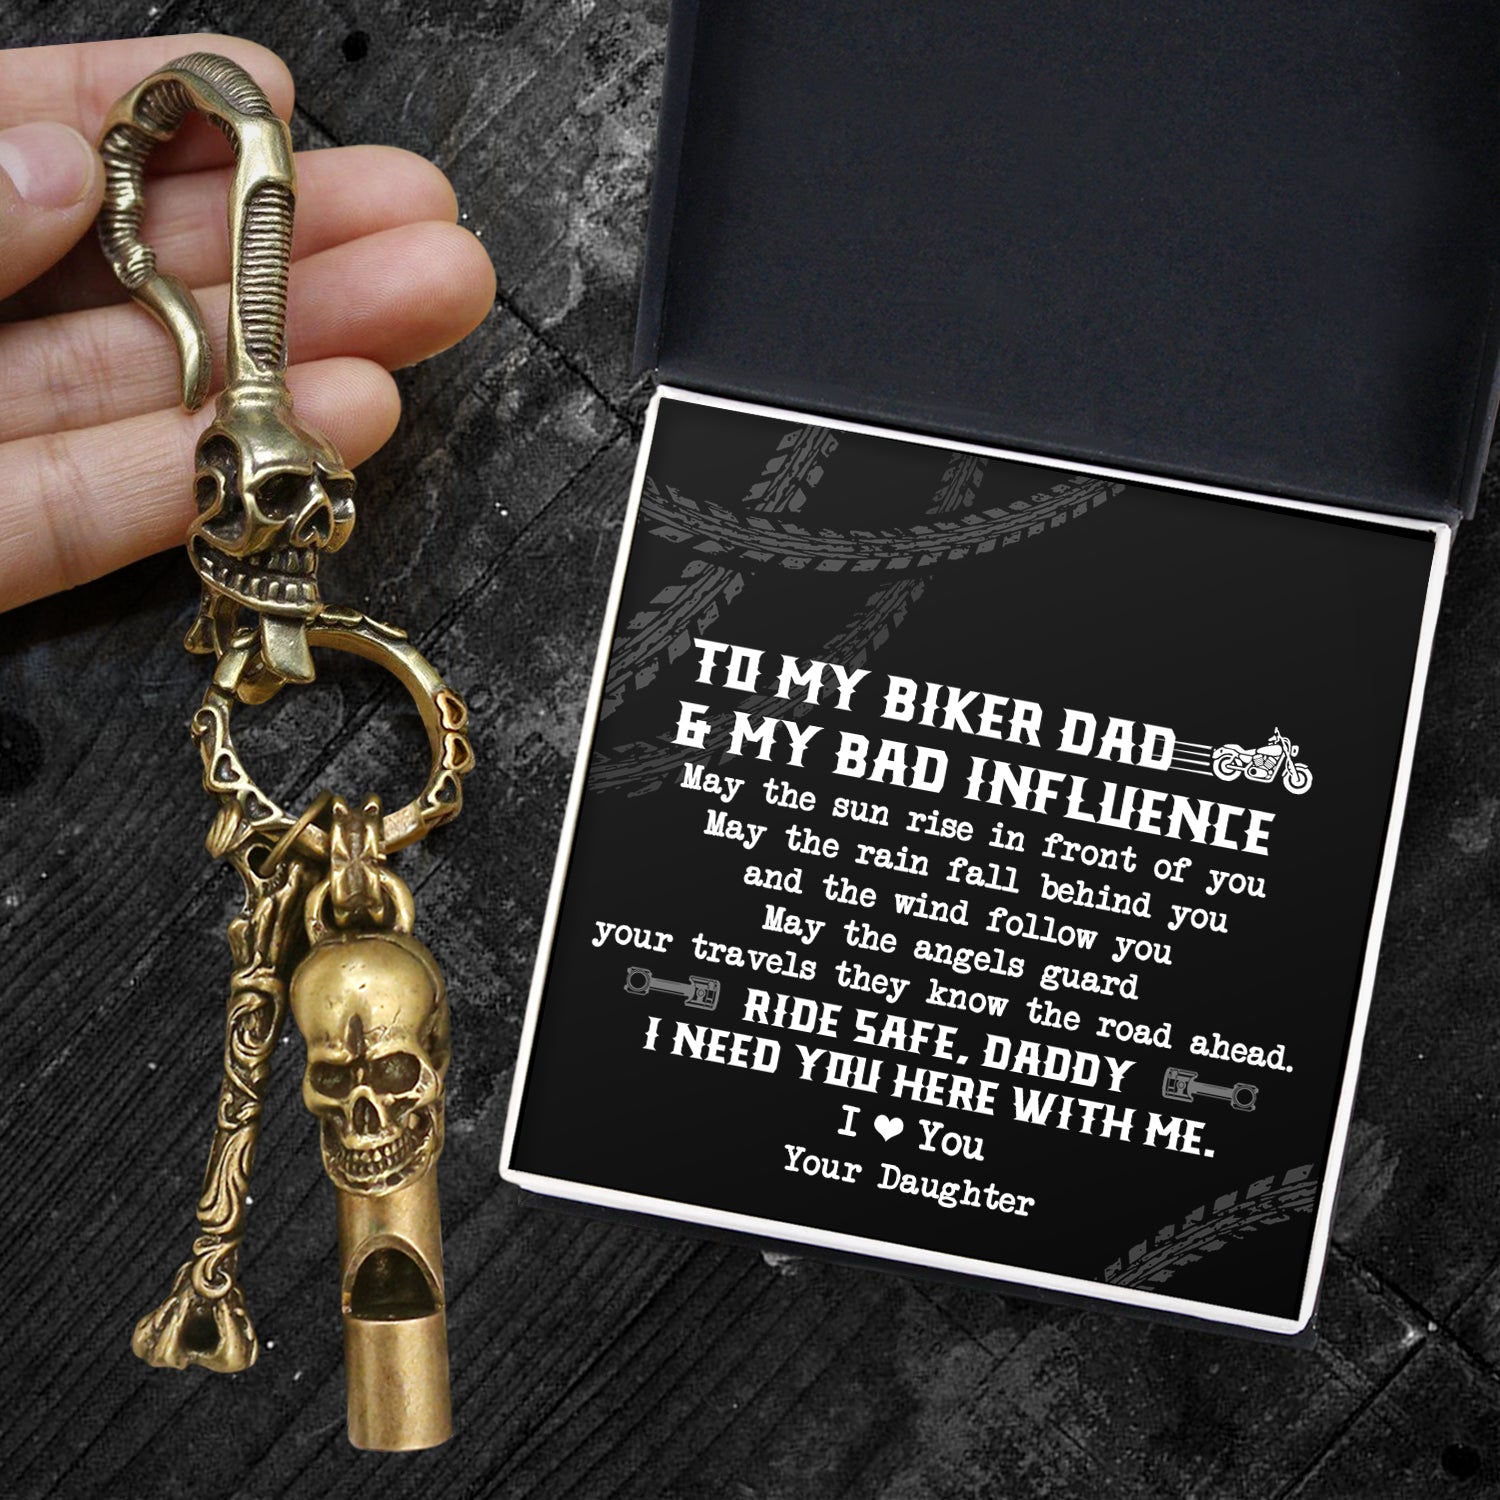 Skull Keychain Holder - Biker - To My Dad - May The Angels Guard Your Travels They Know The Road Ahead - Ukgkci18017